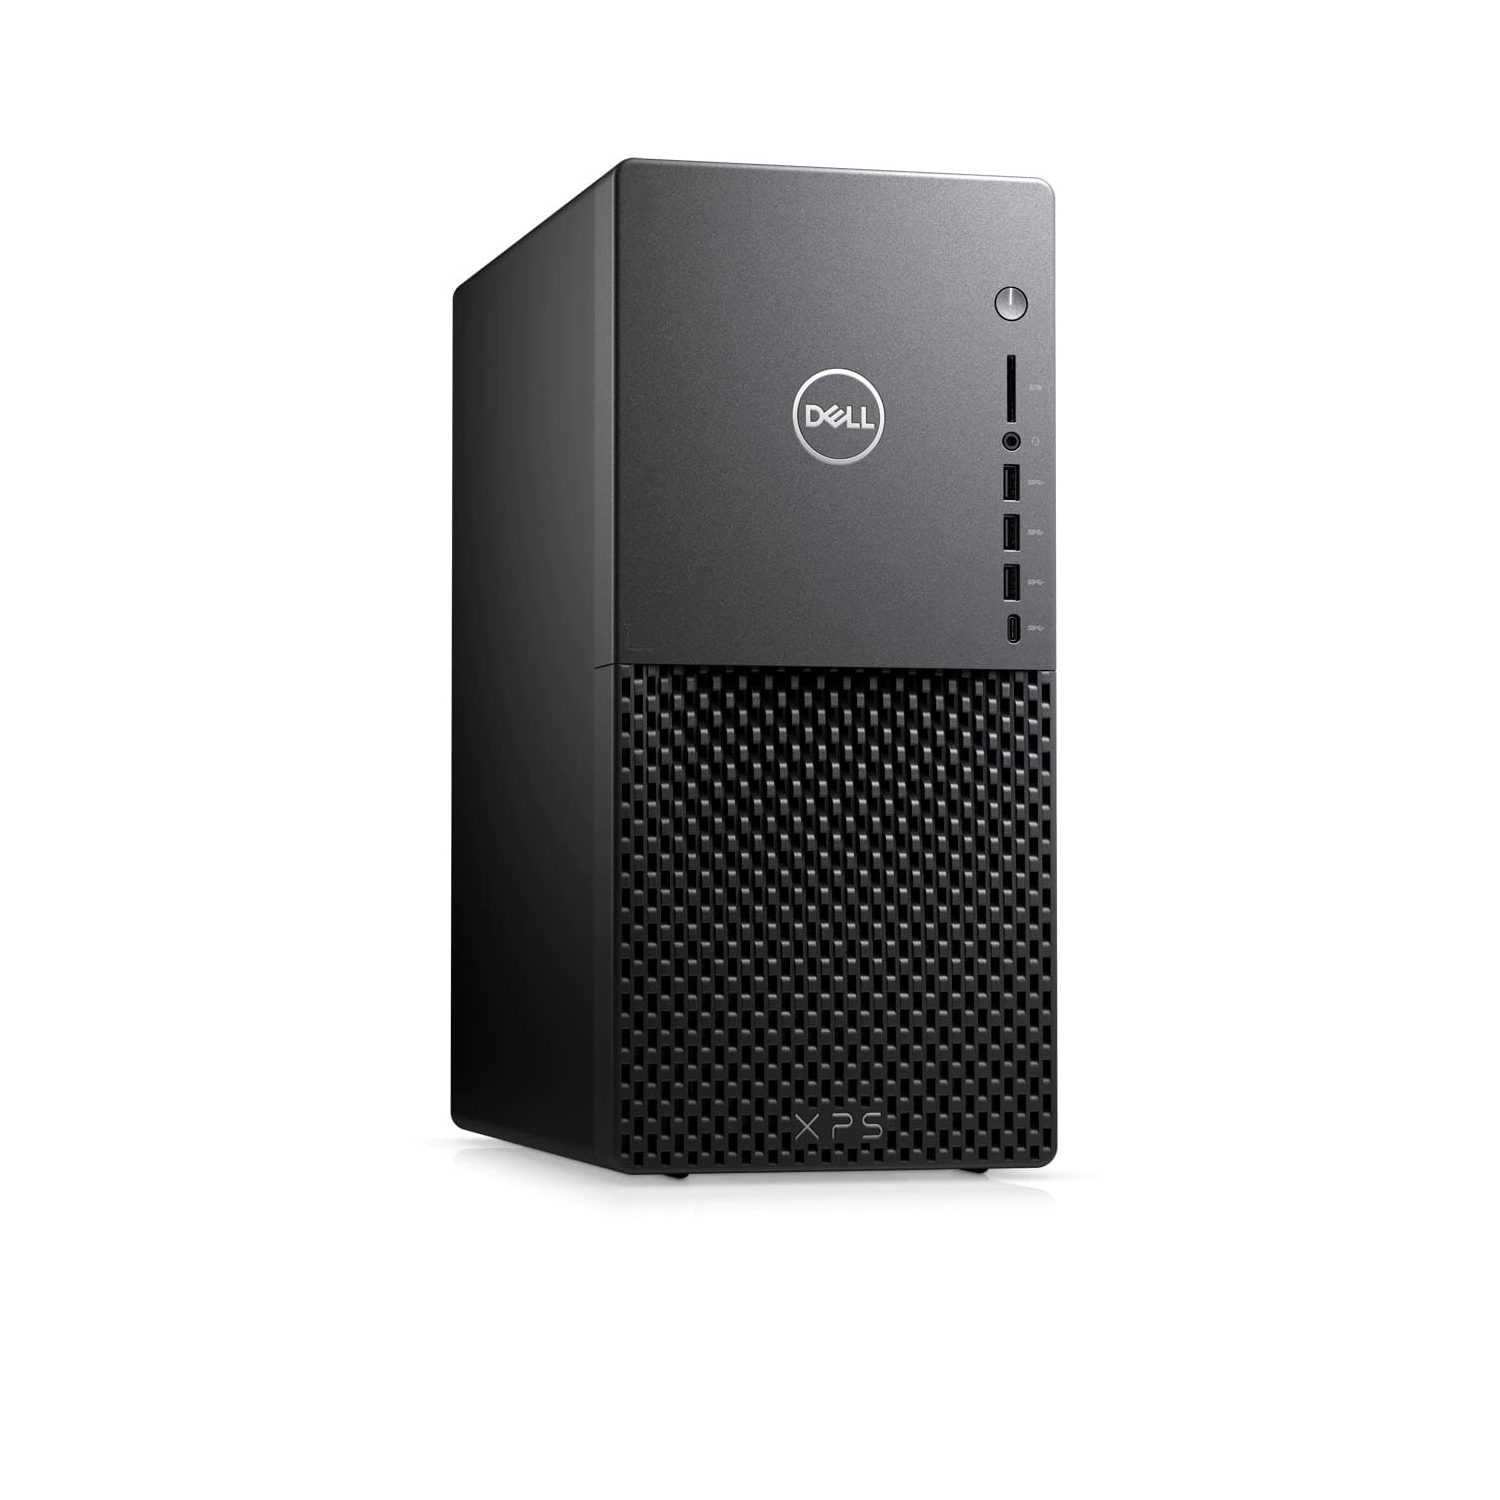 Refurbished (Excellent) - Dell XPS 8940 Desktop (2020) | Core i7 - 1TB SSD + 1TB HDD - 32GB RAM - 2060 SUPER | 8 Cores @ 4.8 GHz - 10th Gen CPU Certified Refurbished